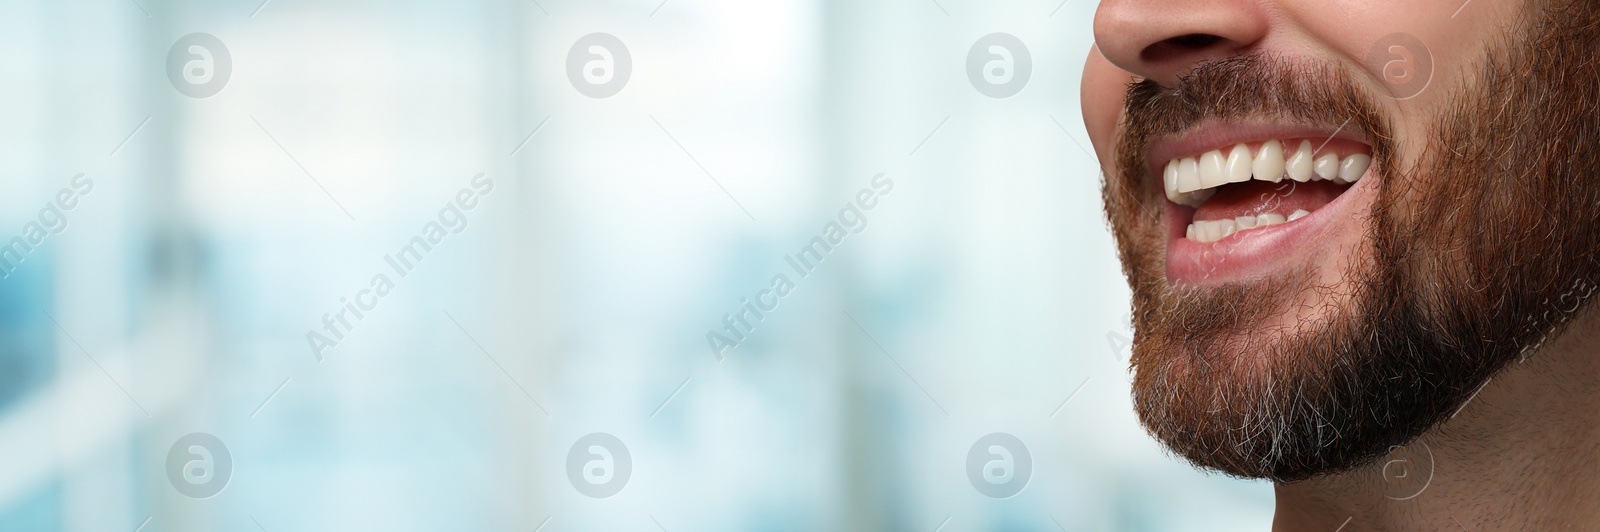 Image of Man with clean teeth smiling on blurred background, closeup. Banner design with space for text